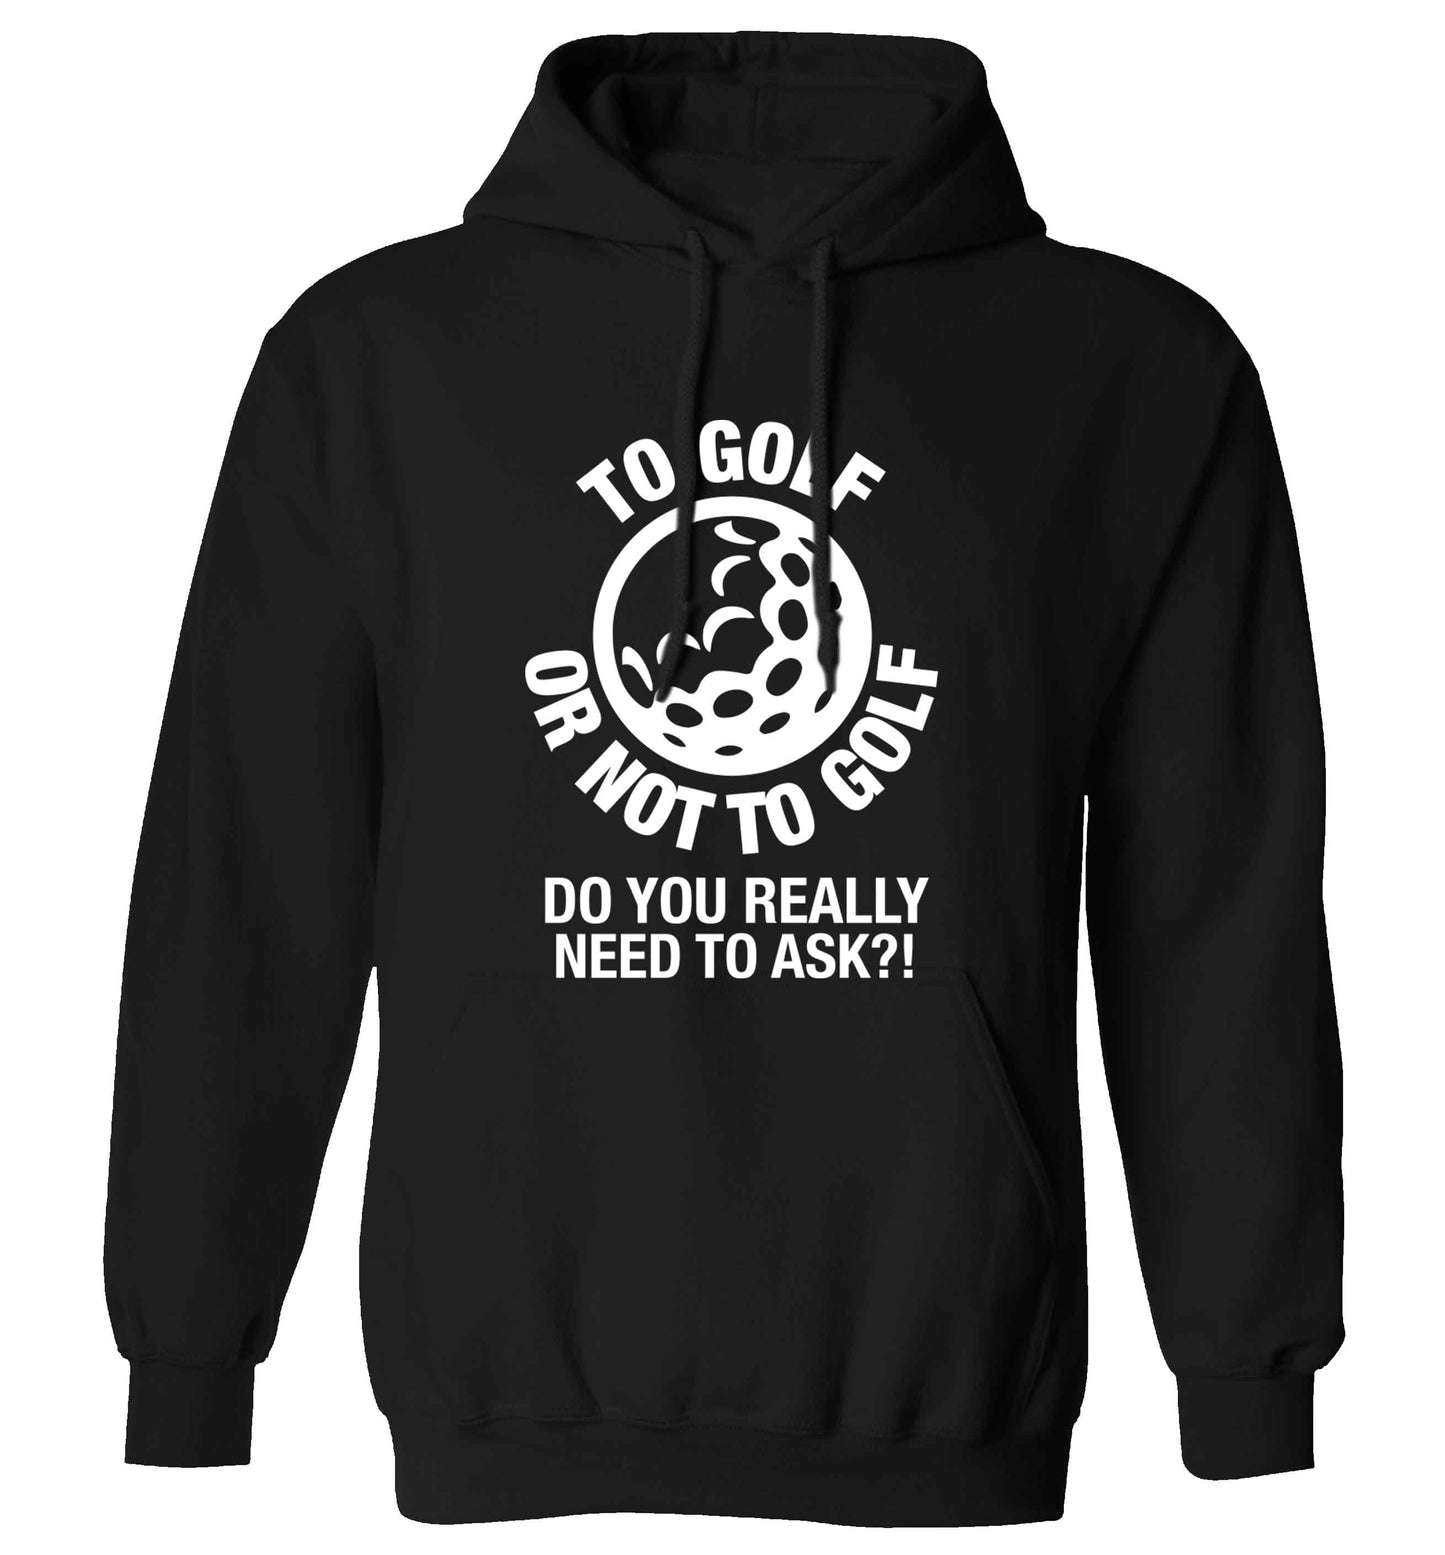 To golf or not to golf Do you really need to ask?! adults unisex black hoodie 2XL